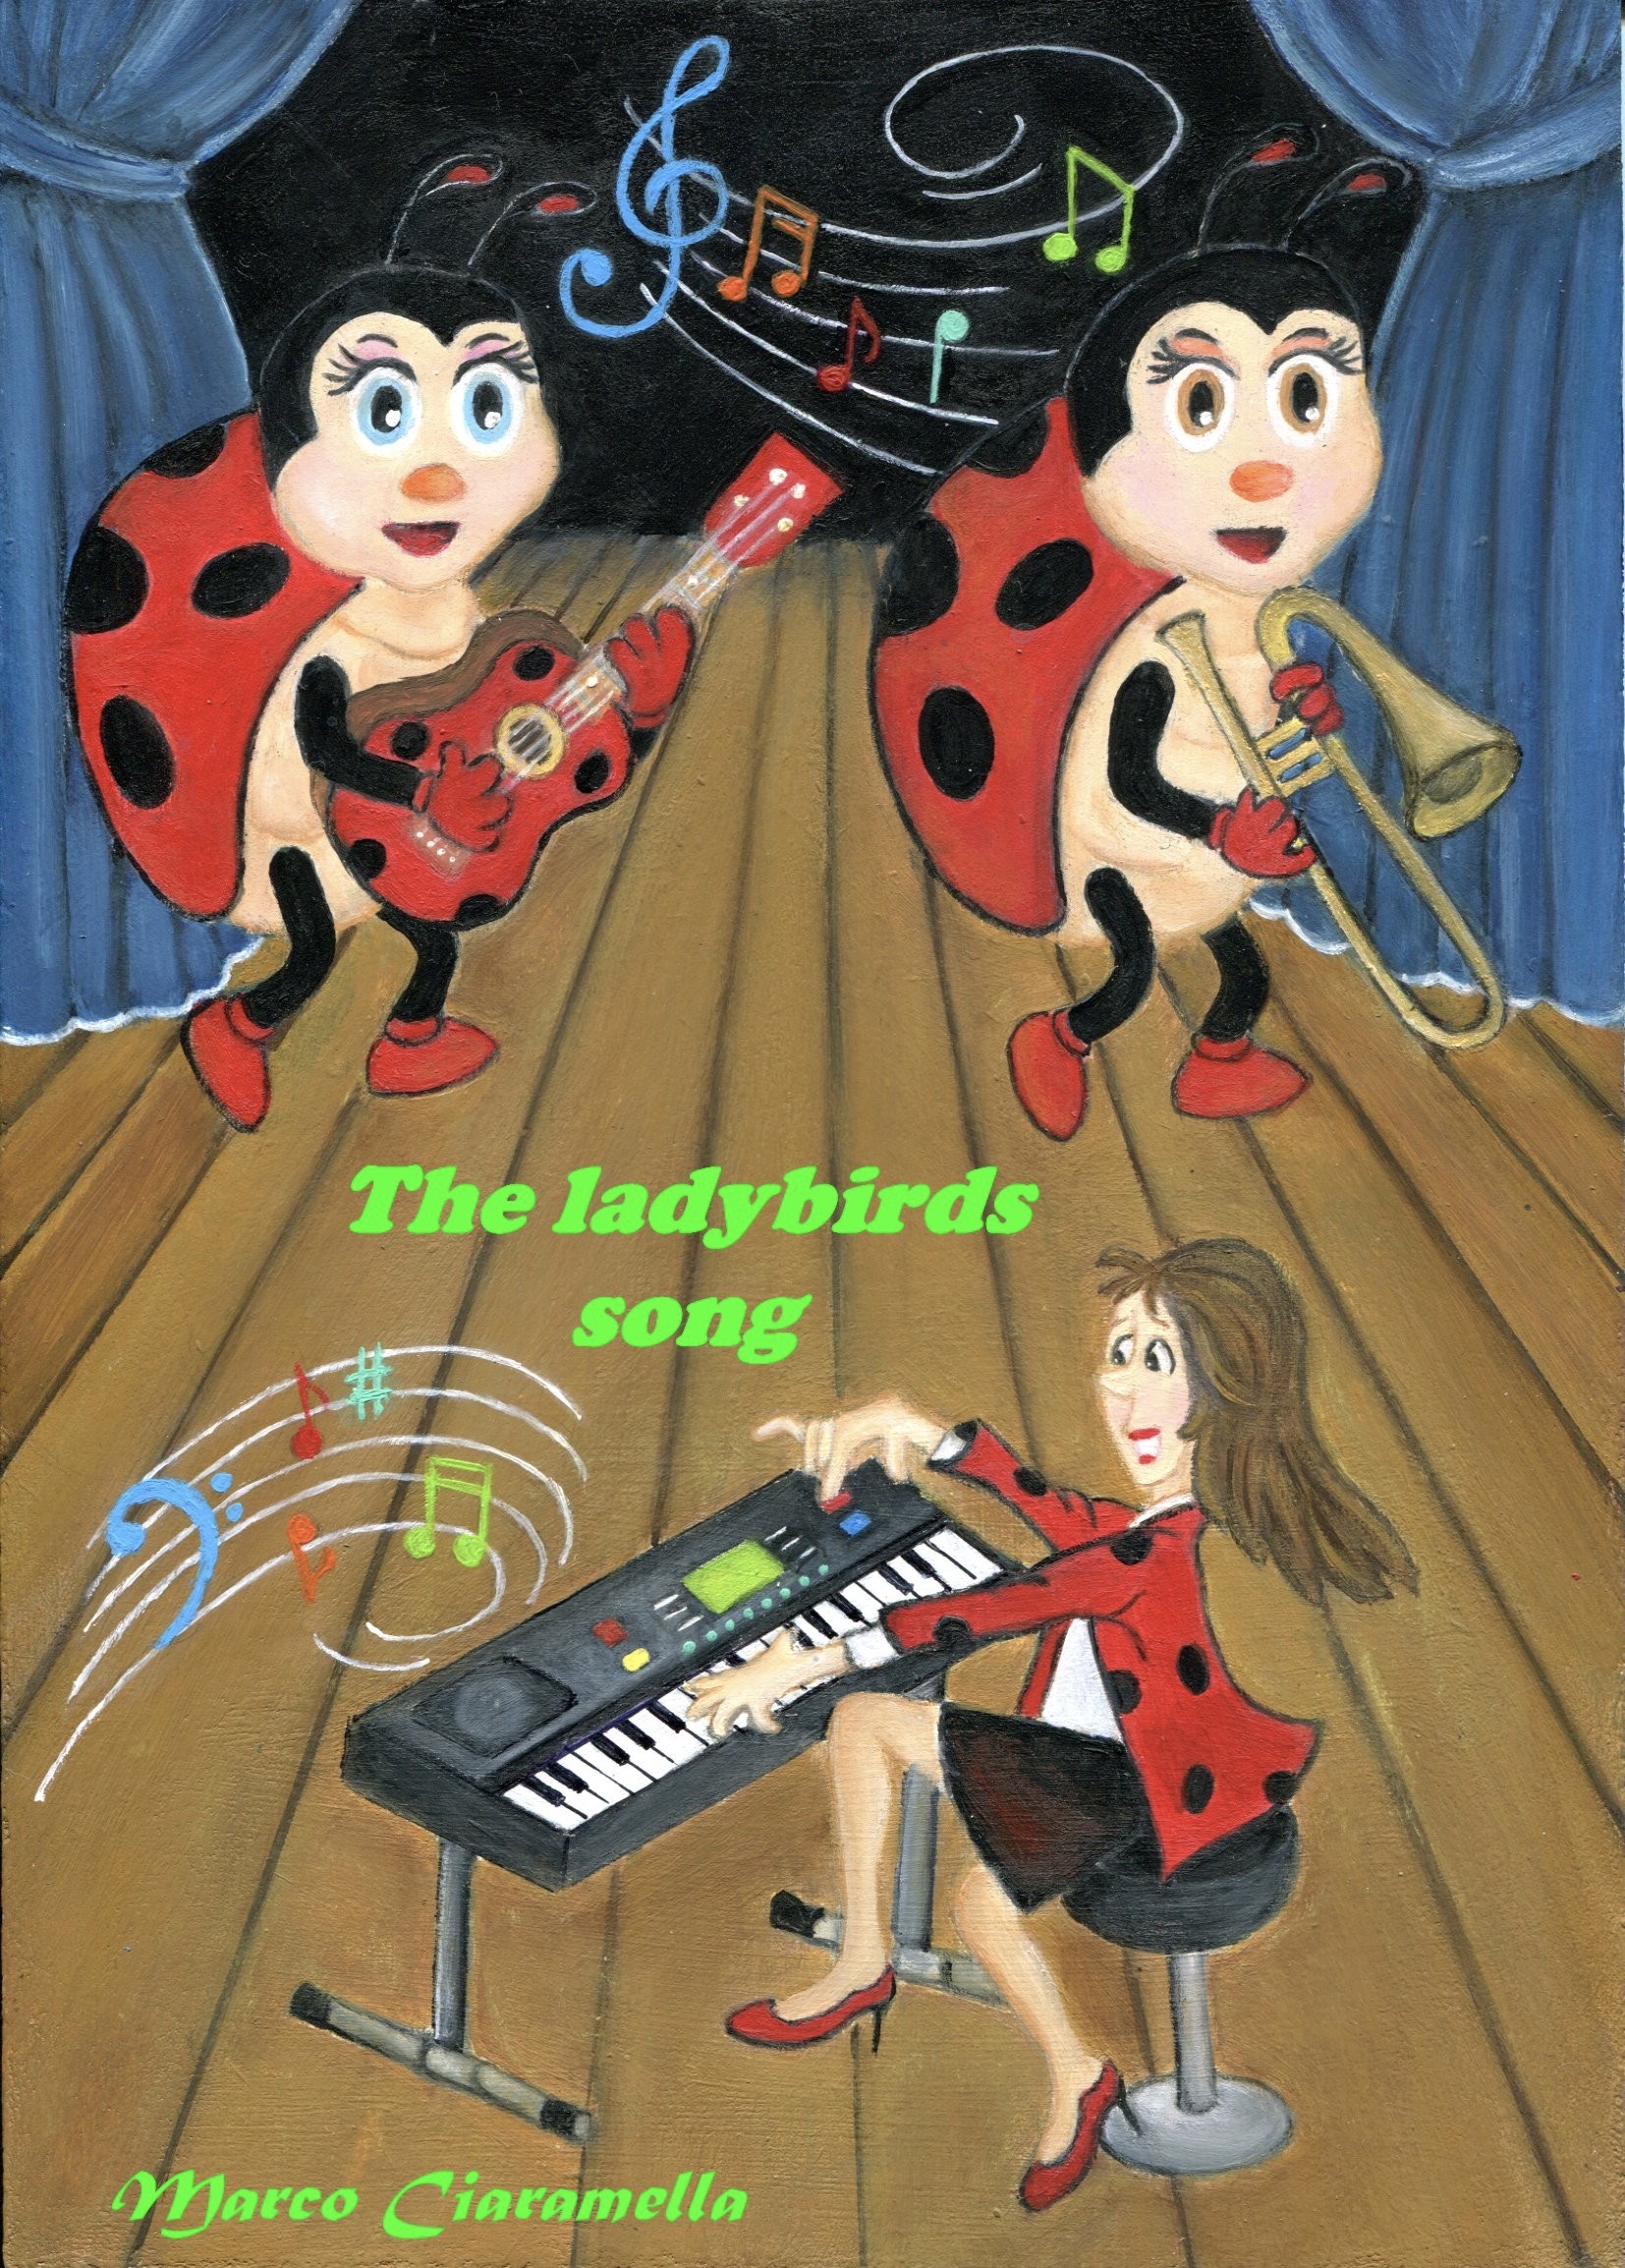 The ladybirds song